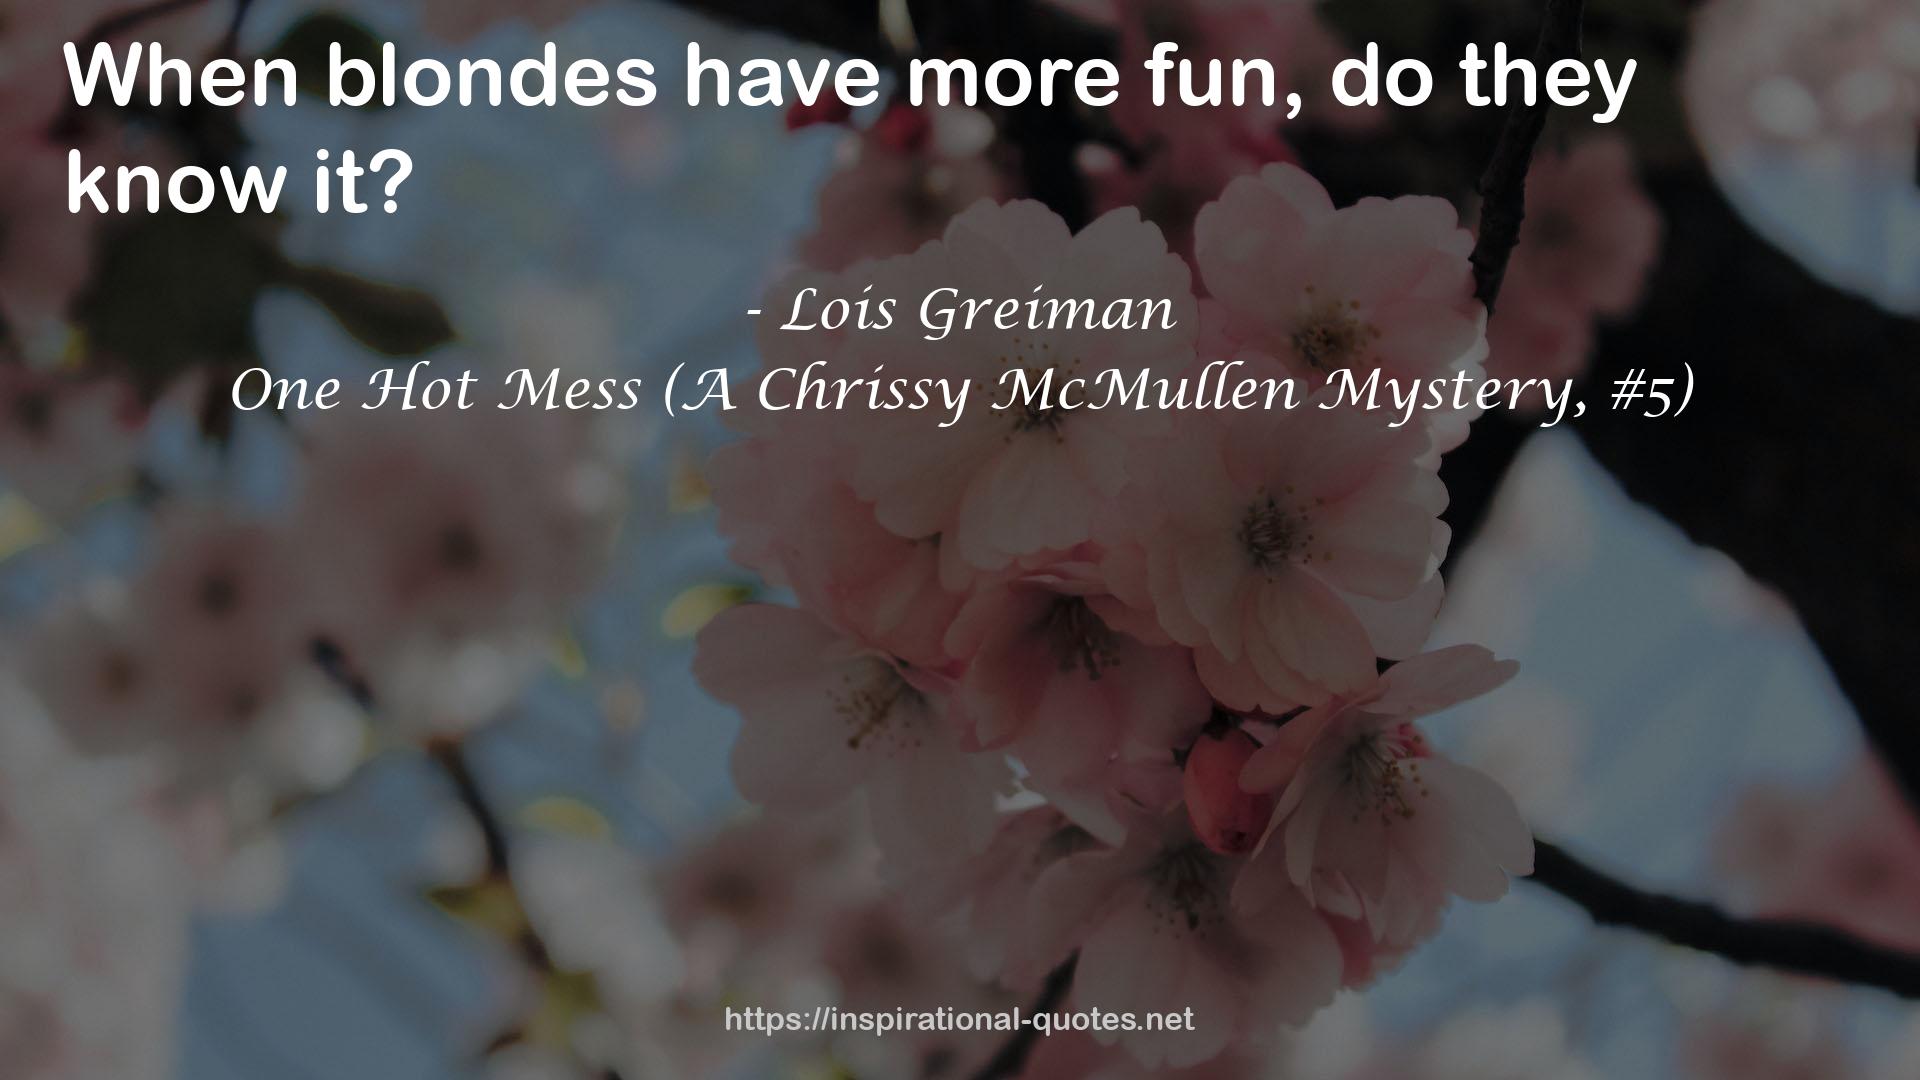 One Hot Mess (A Chrissy McMullen Mystery, #5) QUOTES